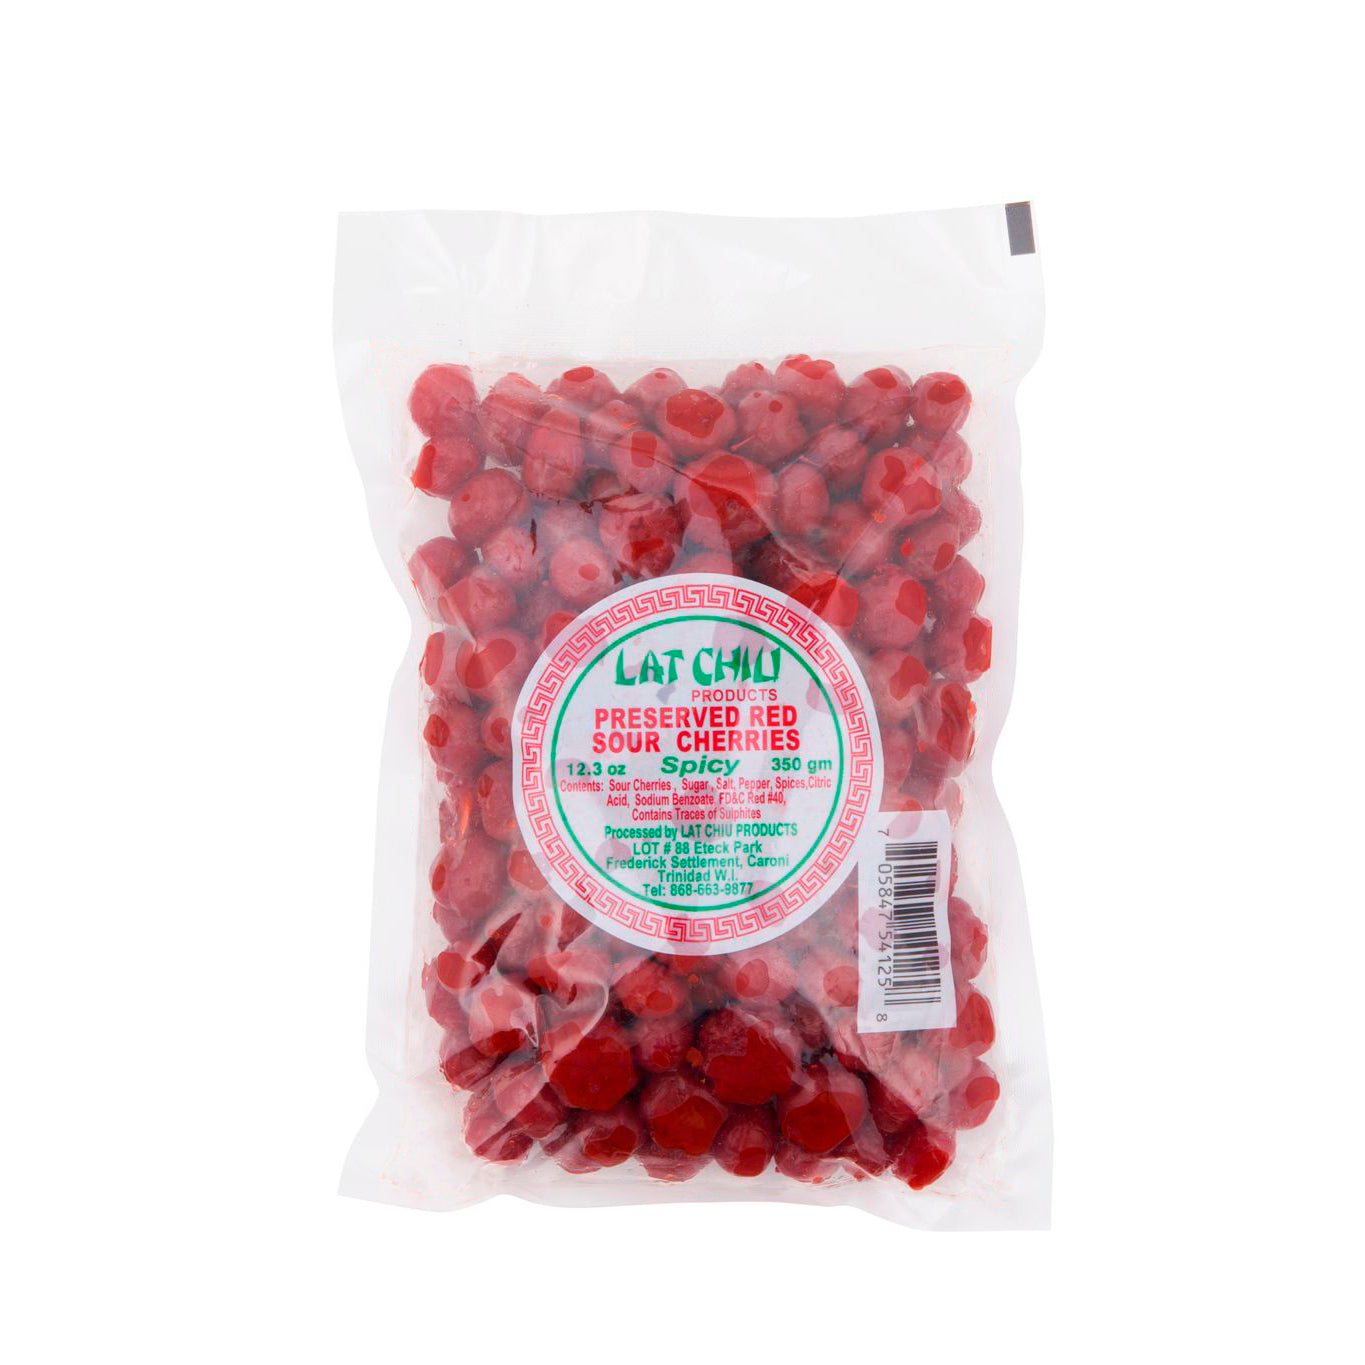 Lat Chiu Preserved Red Sour Cherries